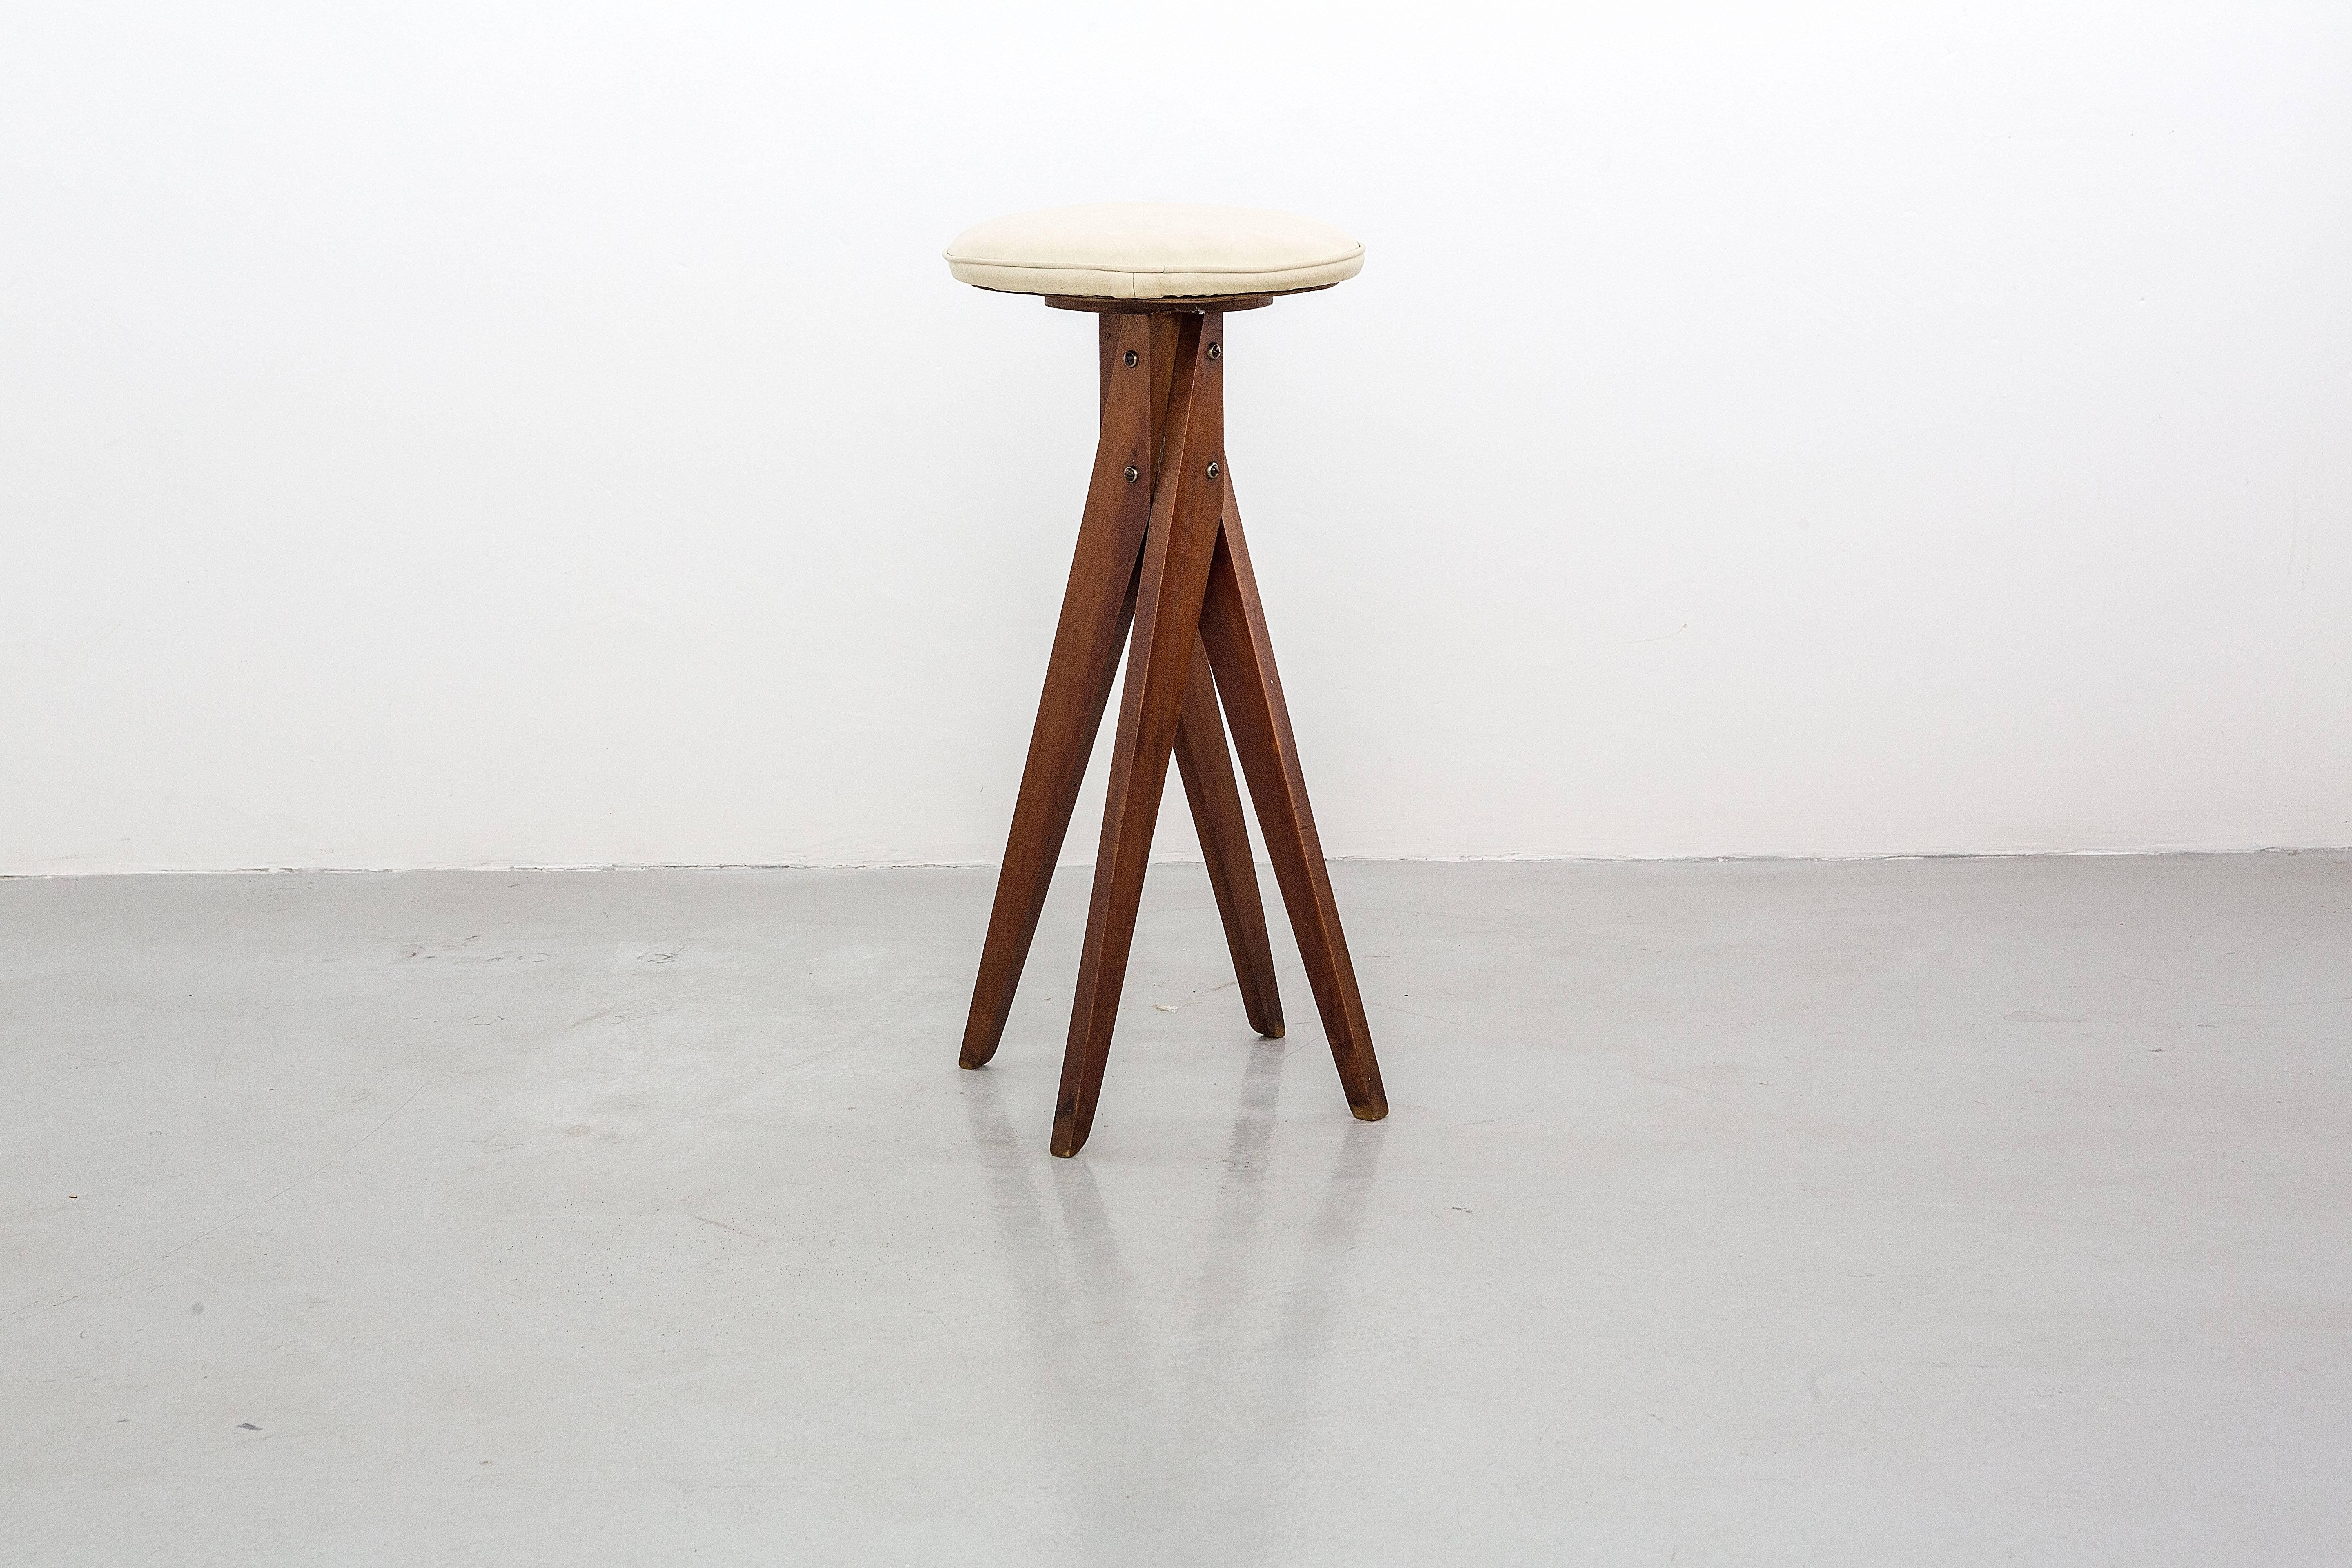 José Zanine Caldas has created one of the most interesting design during the modernist period in Brazil. His use of different kinds of wood, worked in different techniques, is one the marks of his work. This set of stools is an example of the early